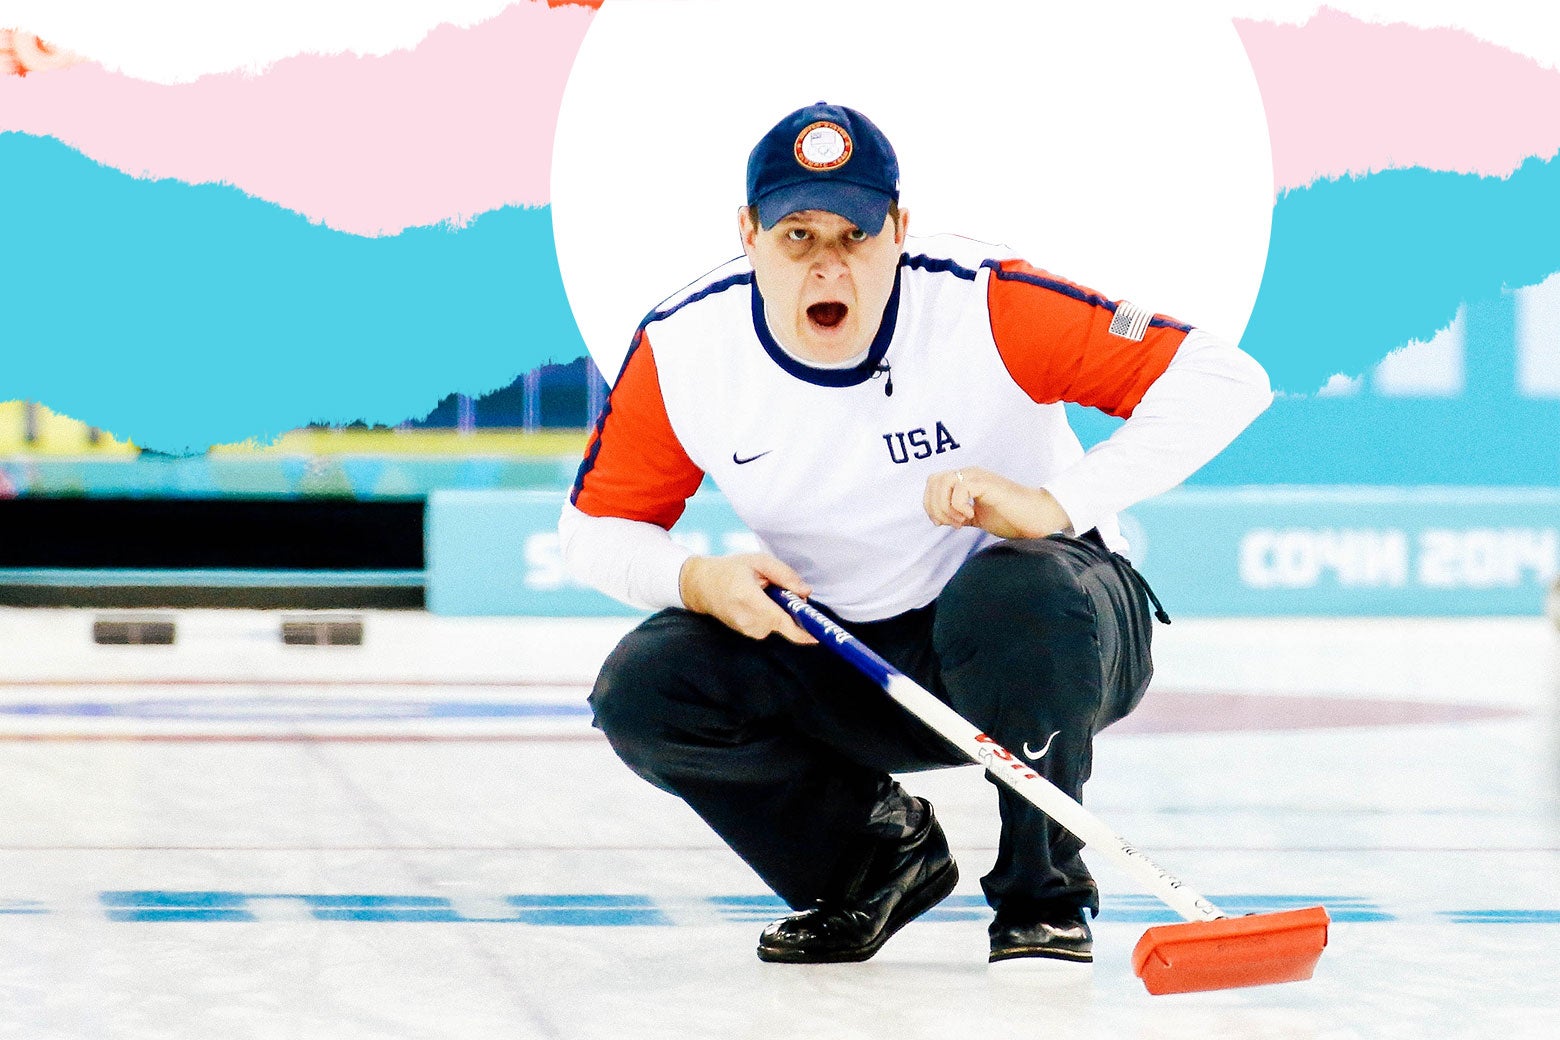 John Shuster of the USA competes against Switzerland during the men’s curling round-robin on Day 10 of the Sochi 2014 Winter Olympics at Ice Cube Curling Center on Feb. 17, 2014 in Sochi, Russia.